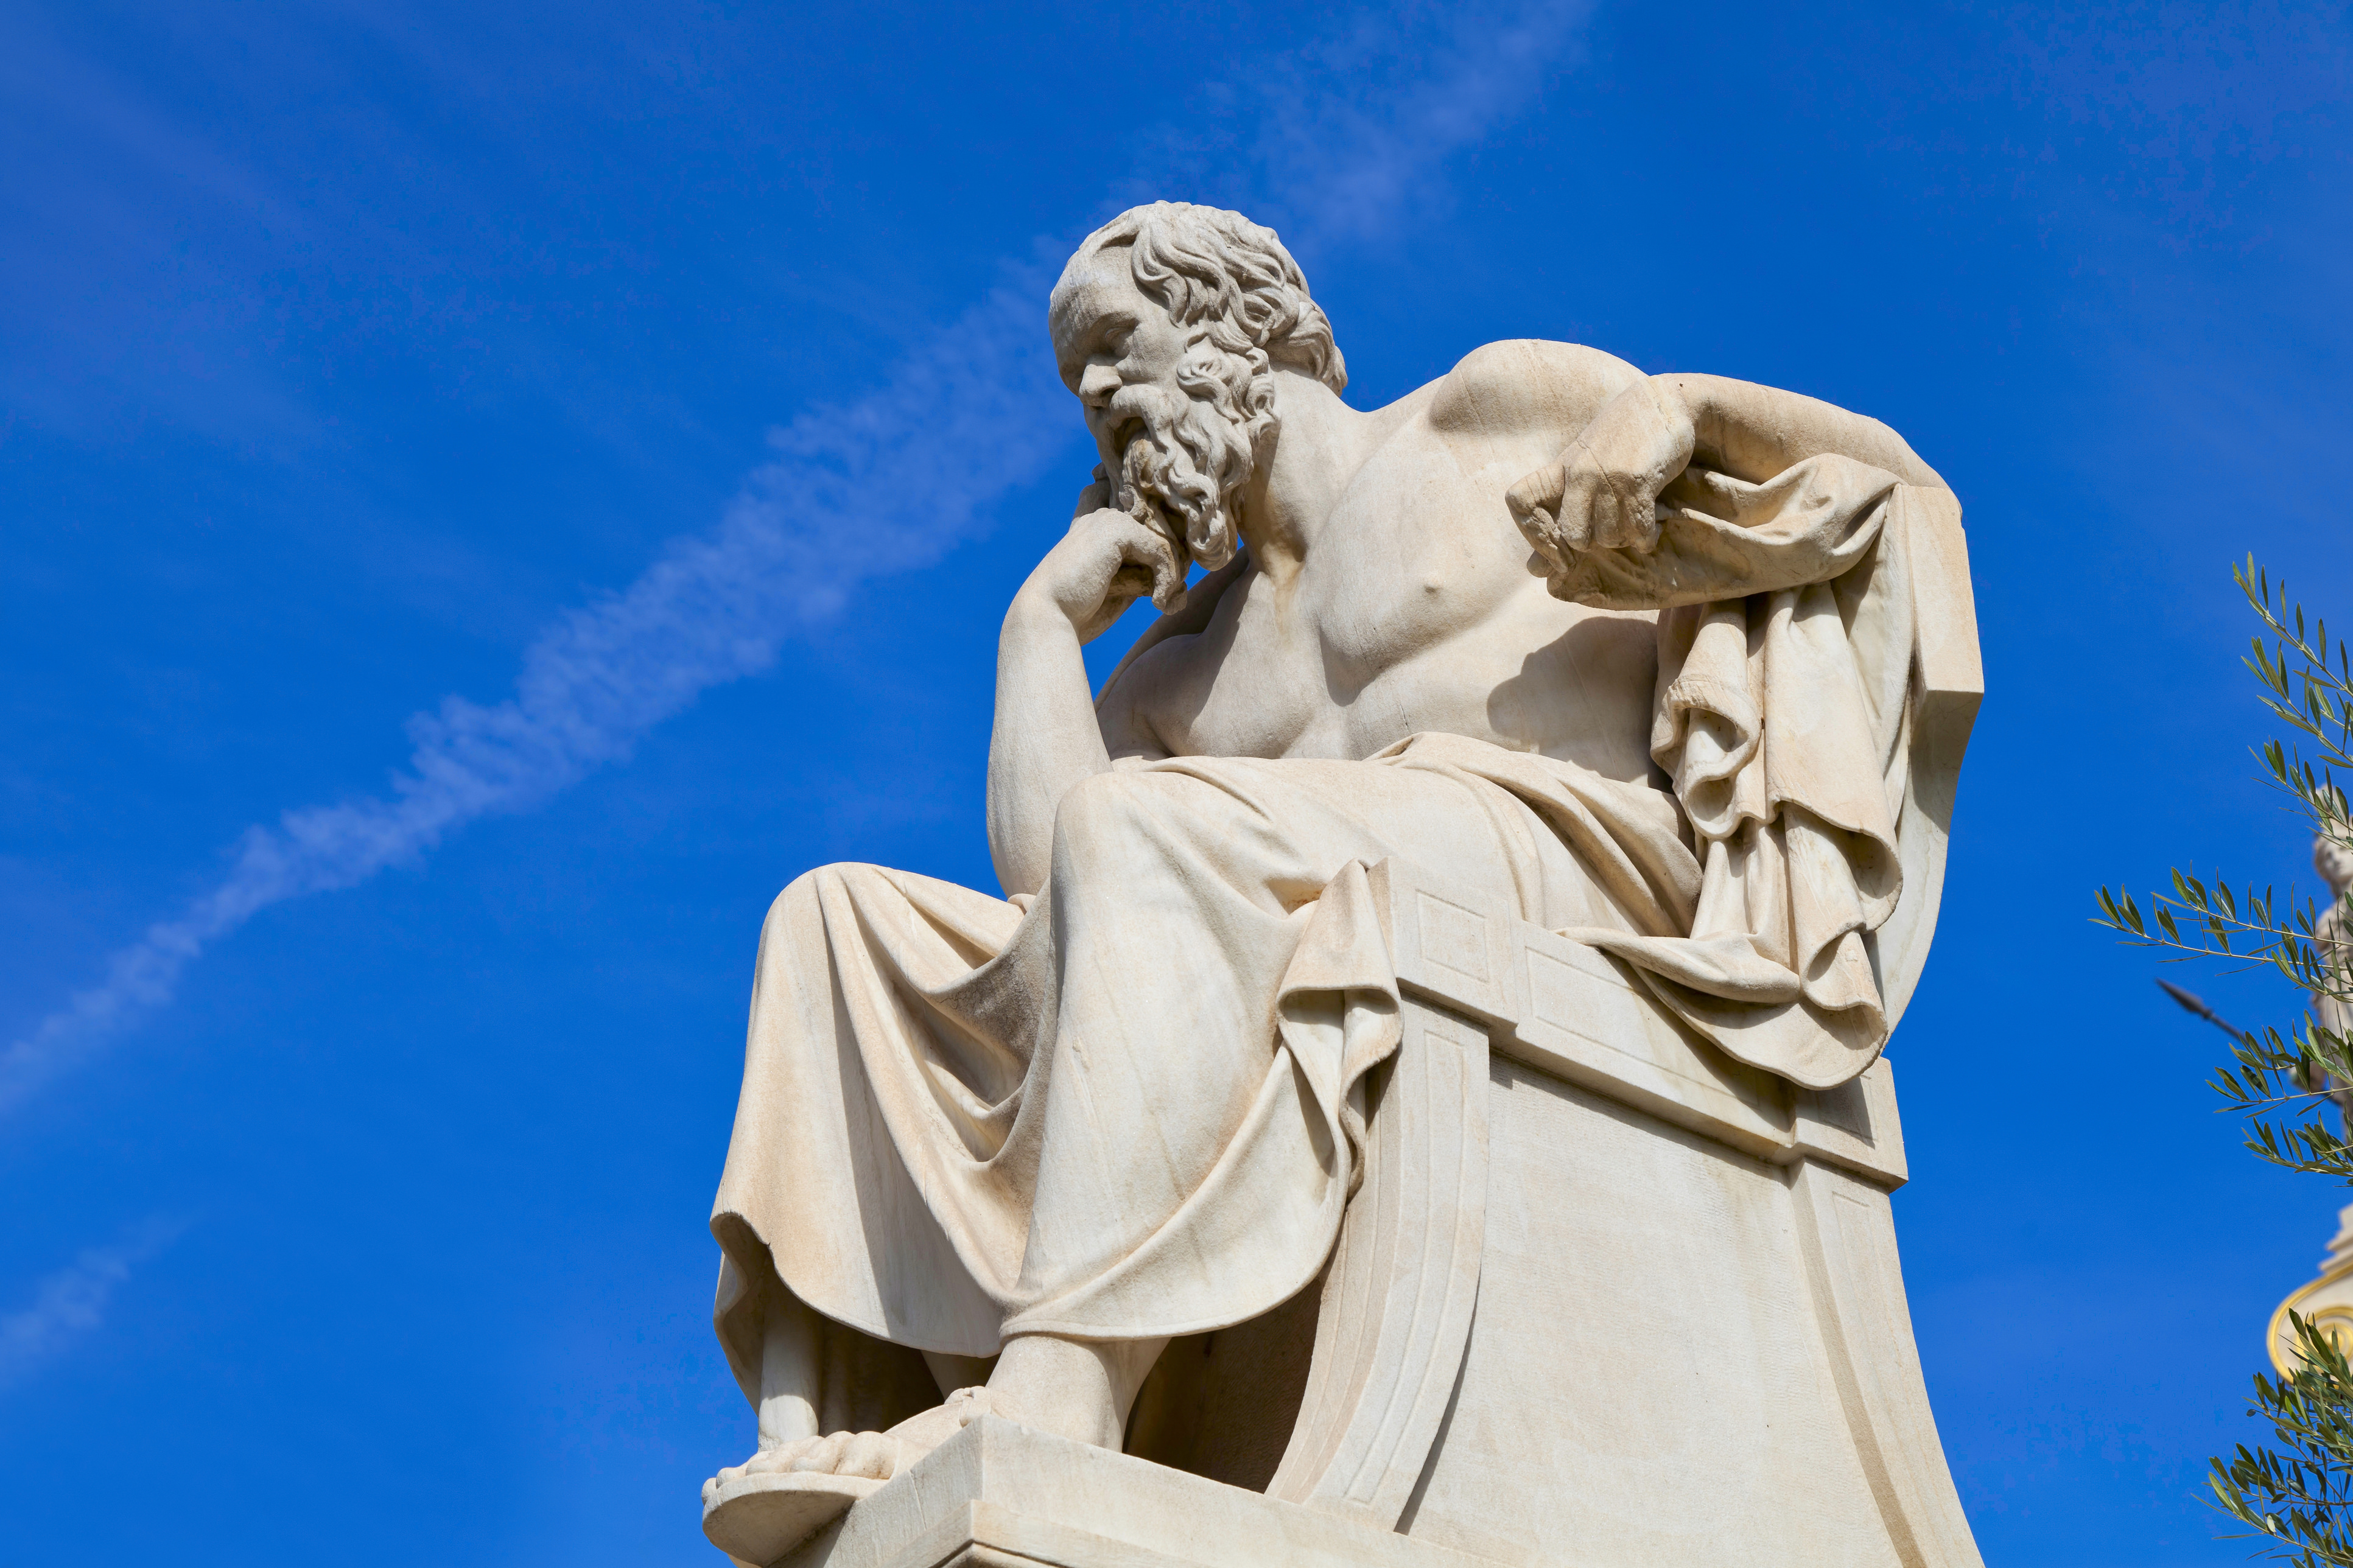 Do You Know About Socrates?